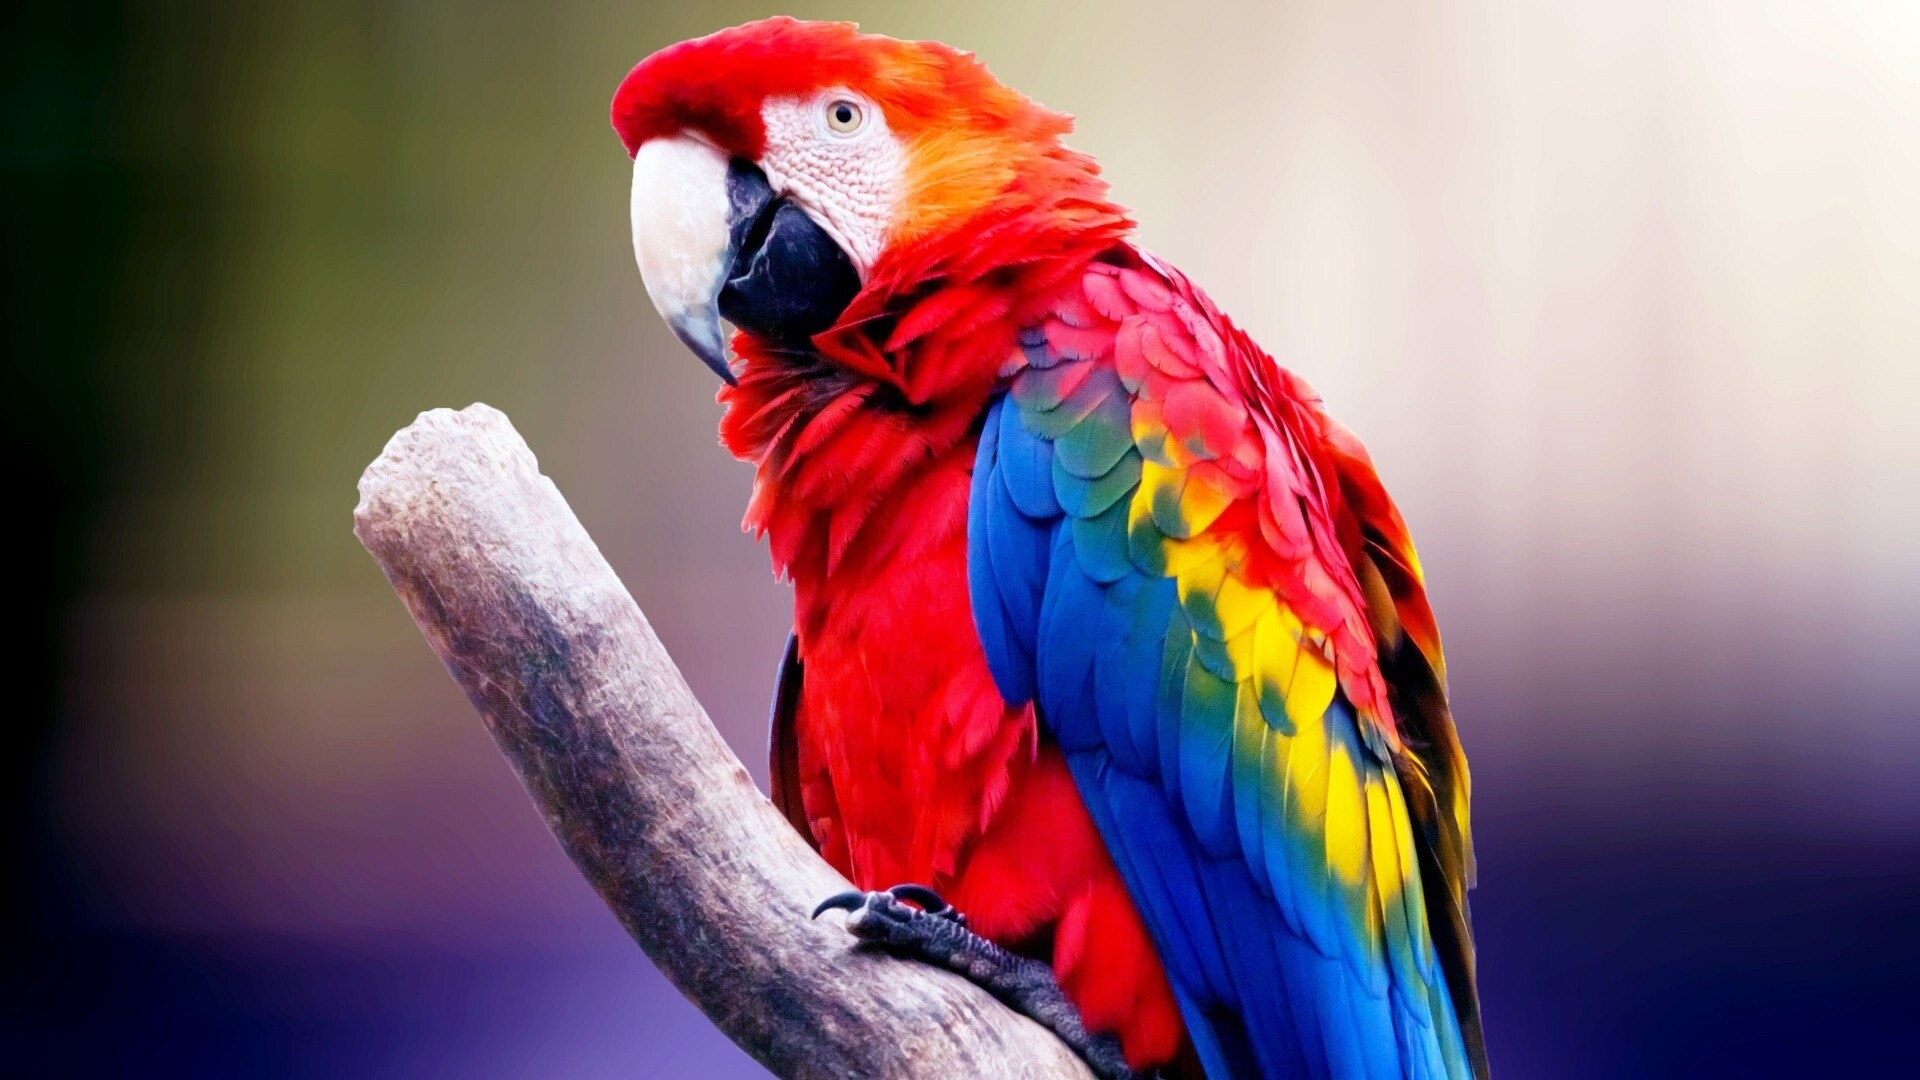 Bird: Macaws, A group of New World parrots. 1920x1080 Full HD Background.